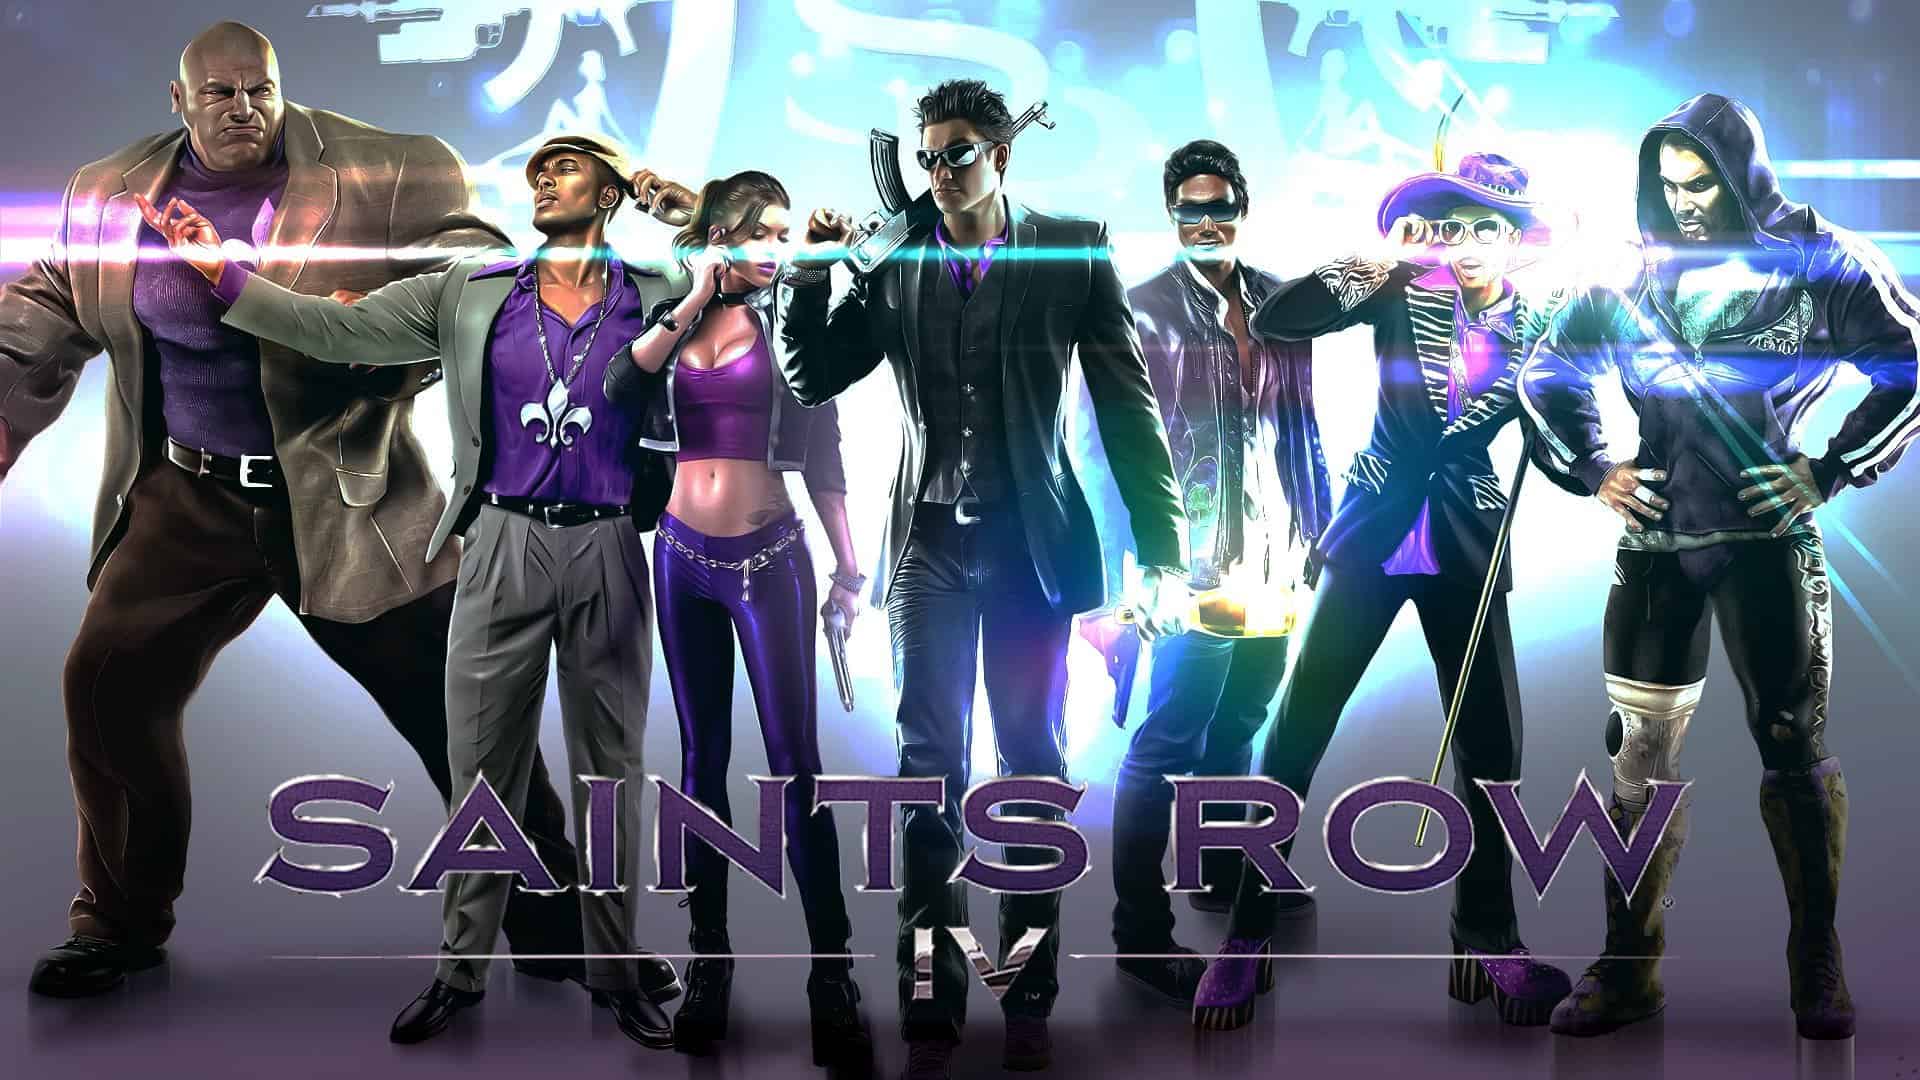 Take the Saints to new heights with outrageous weapons and abilities in Saints Row 4!